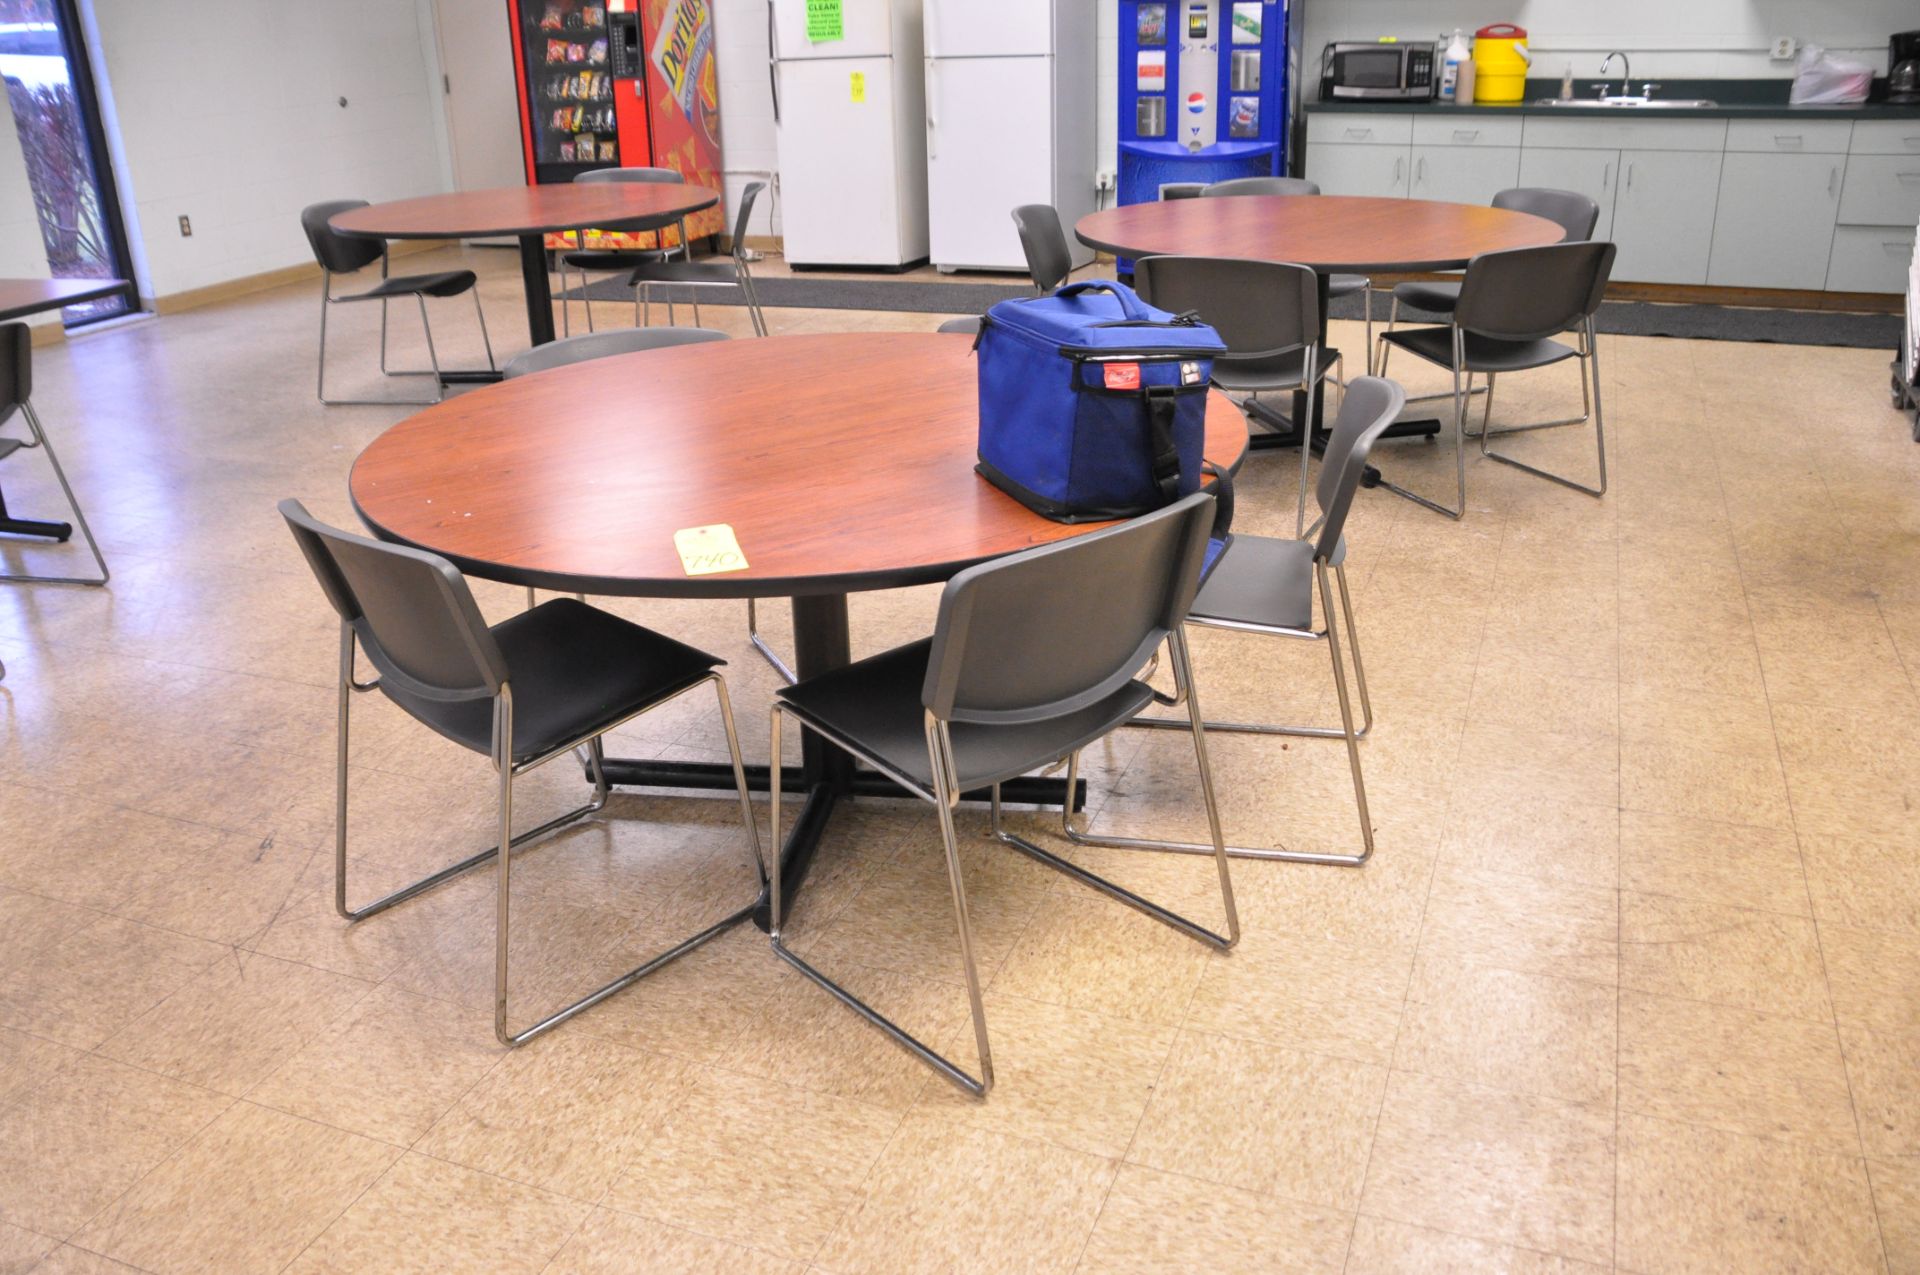 Lot-(7) Tables with Chairs and Lockers (Breakroom)